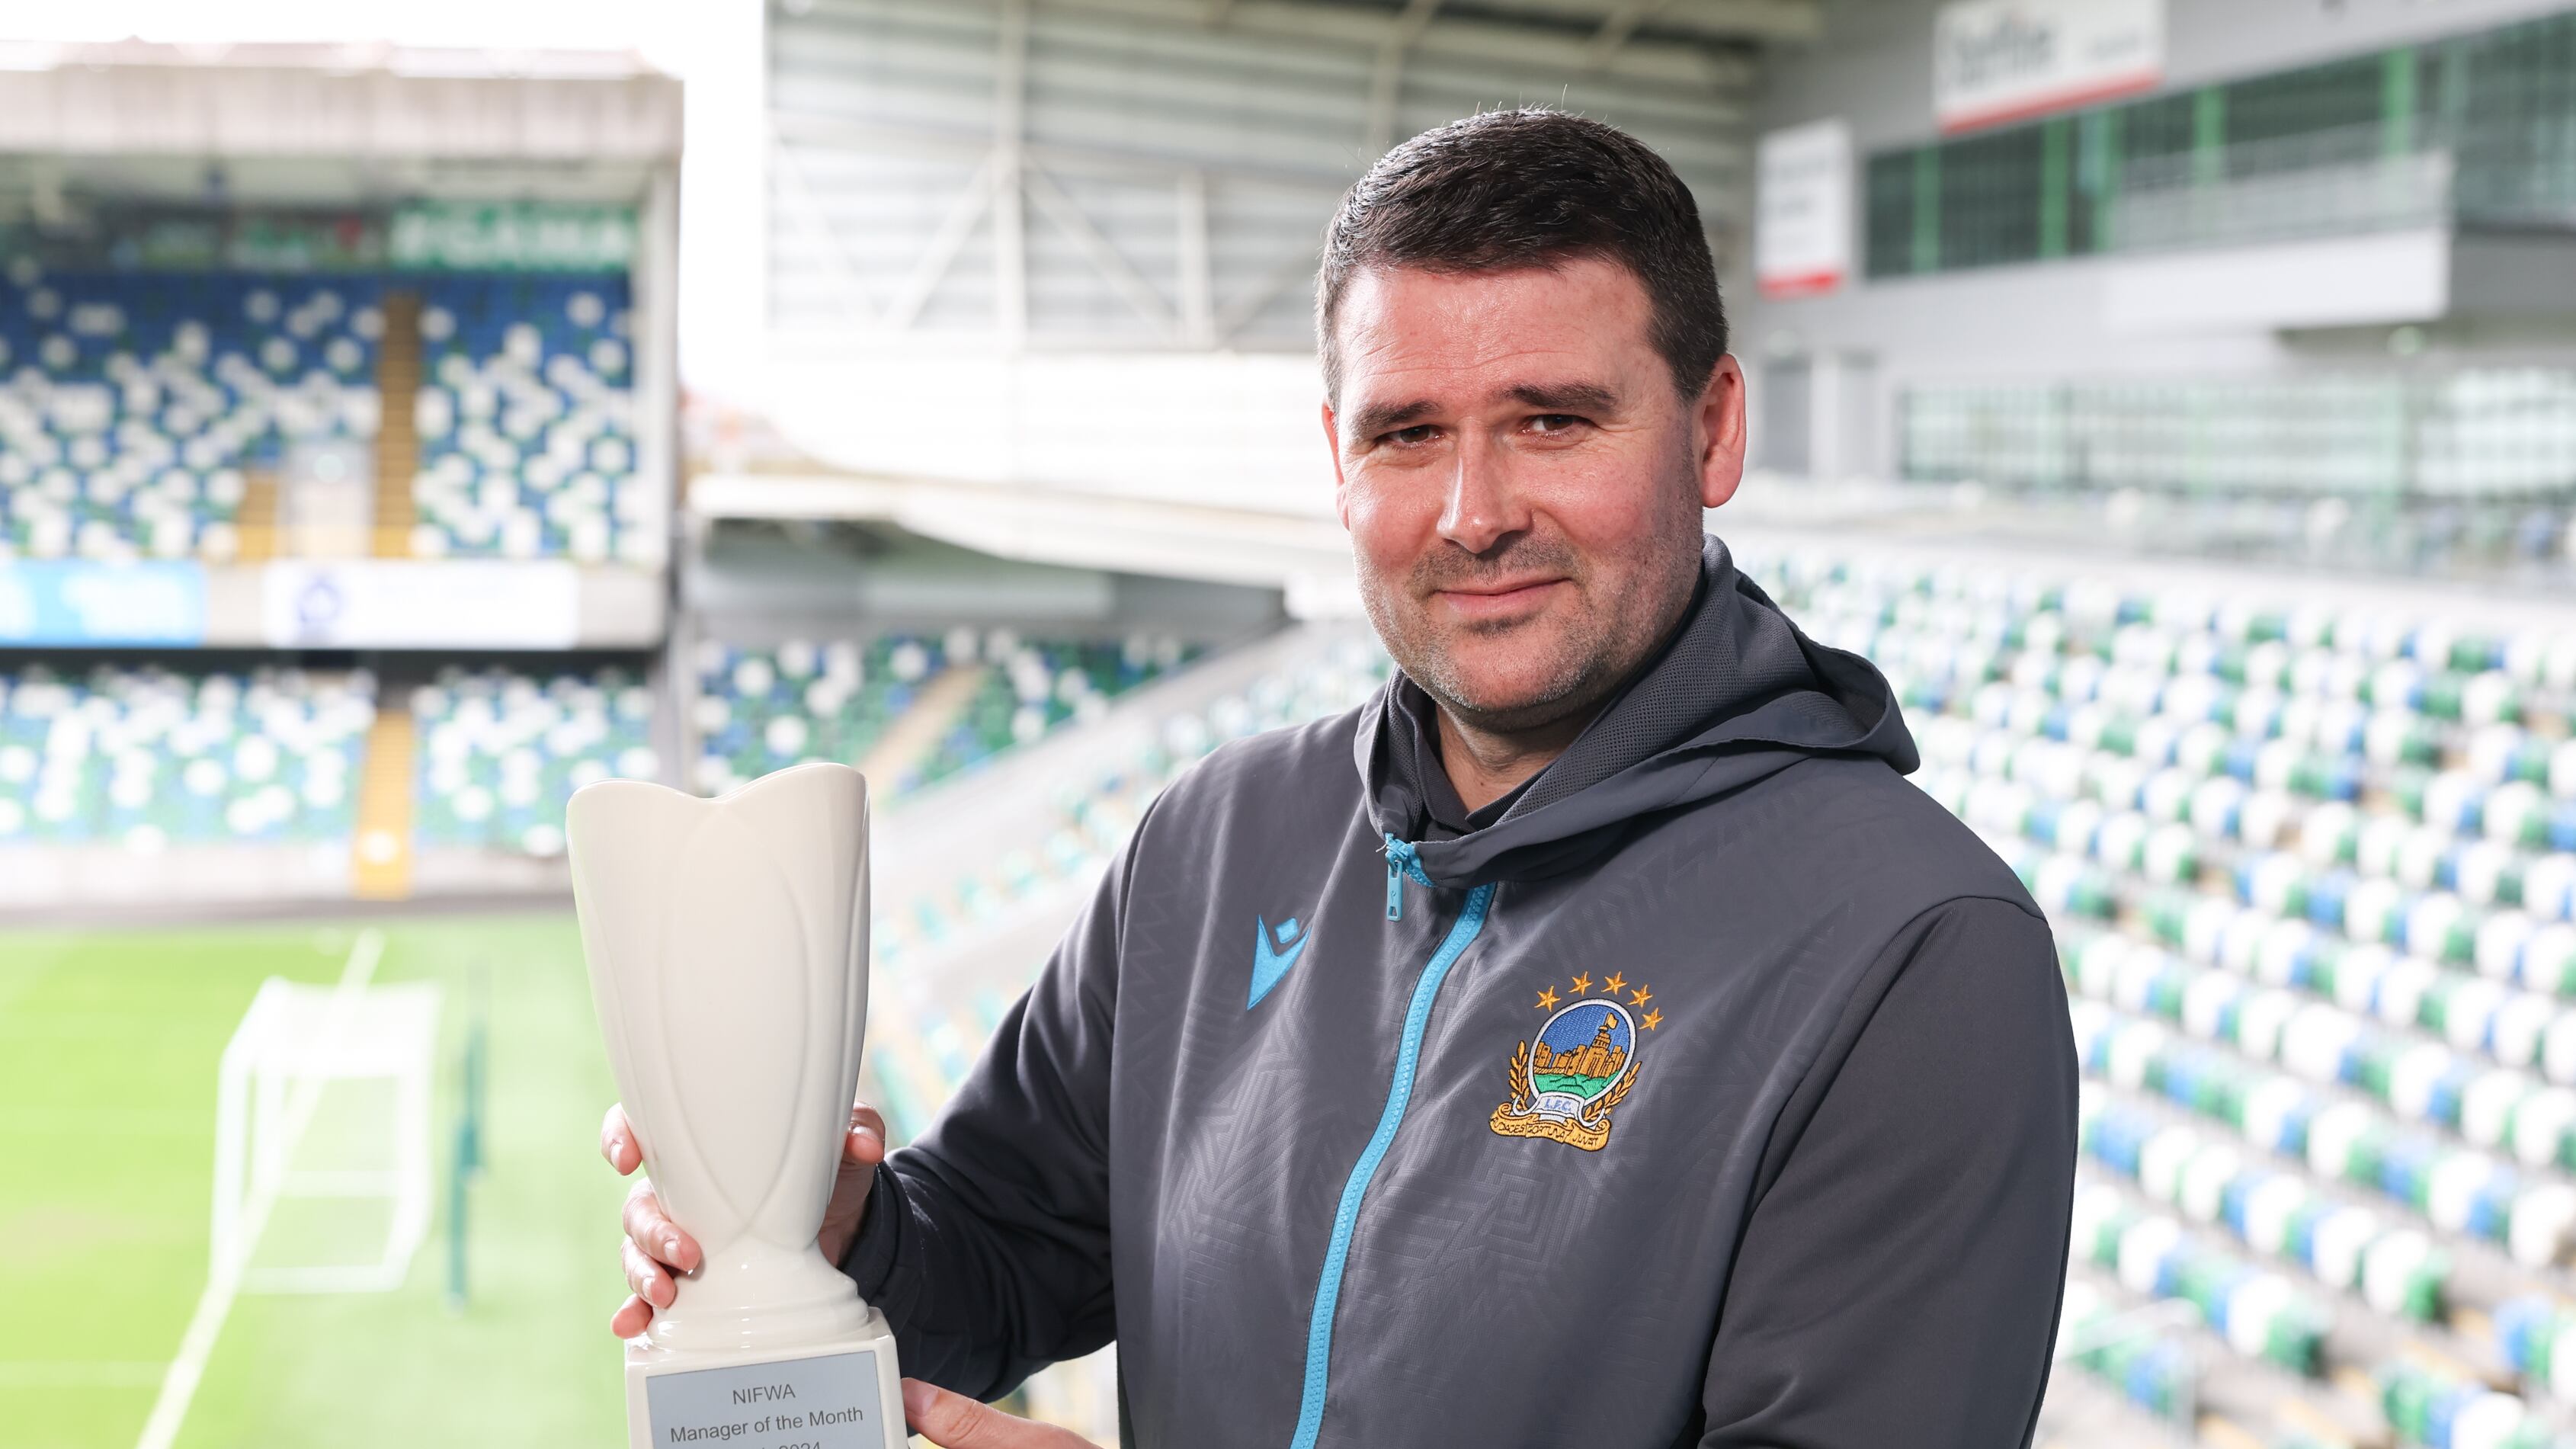 David Healy was named Manager of the Month for March